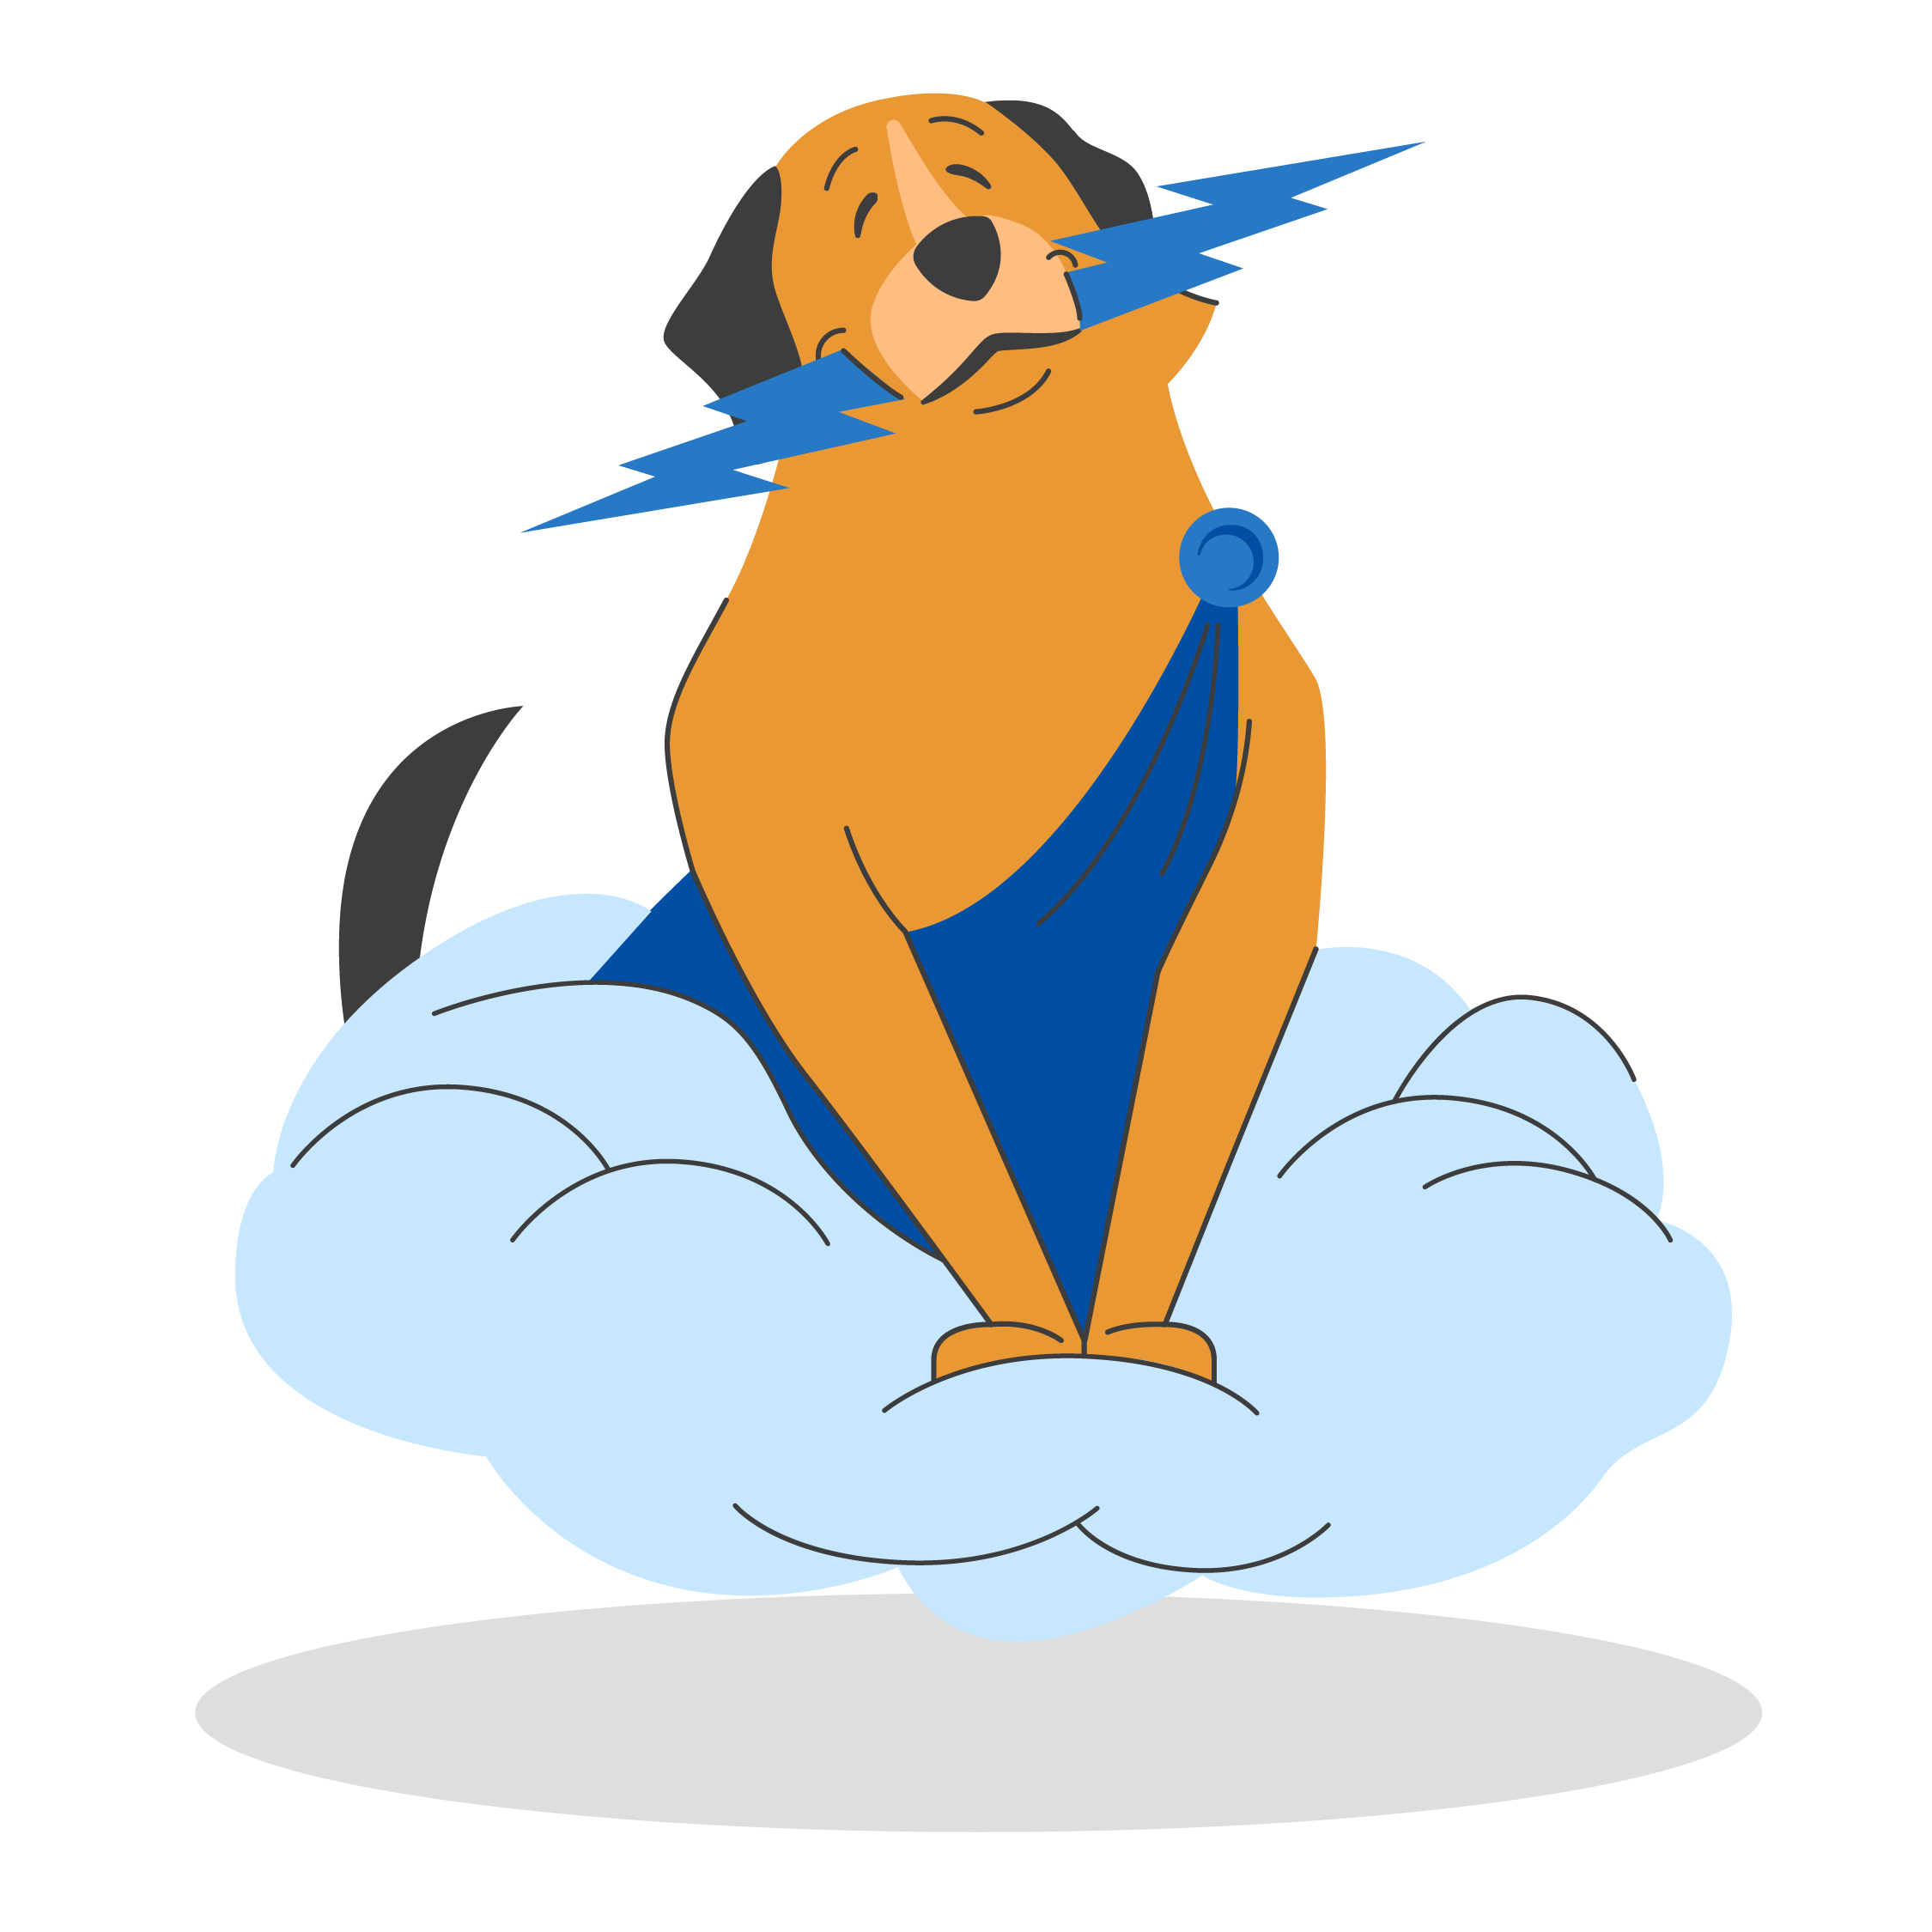 animated brown dog sitting on a cloud wearing a blue toga with a blue lightning bolt in mouth